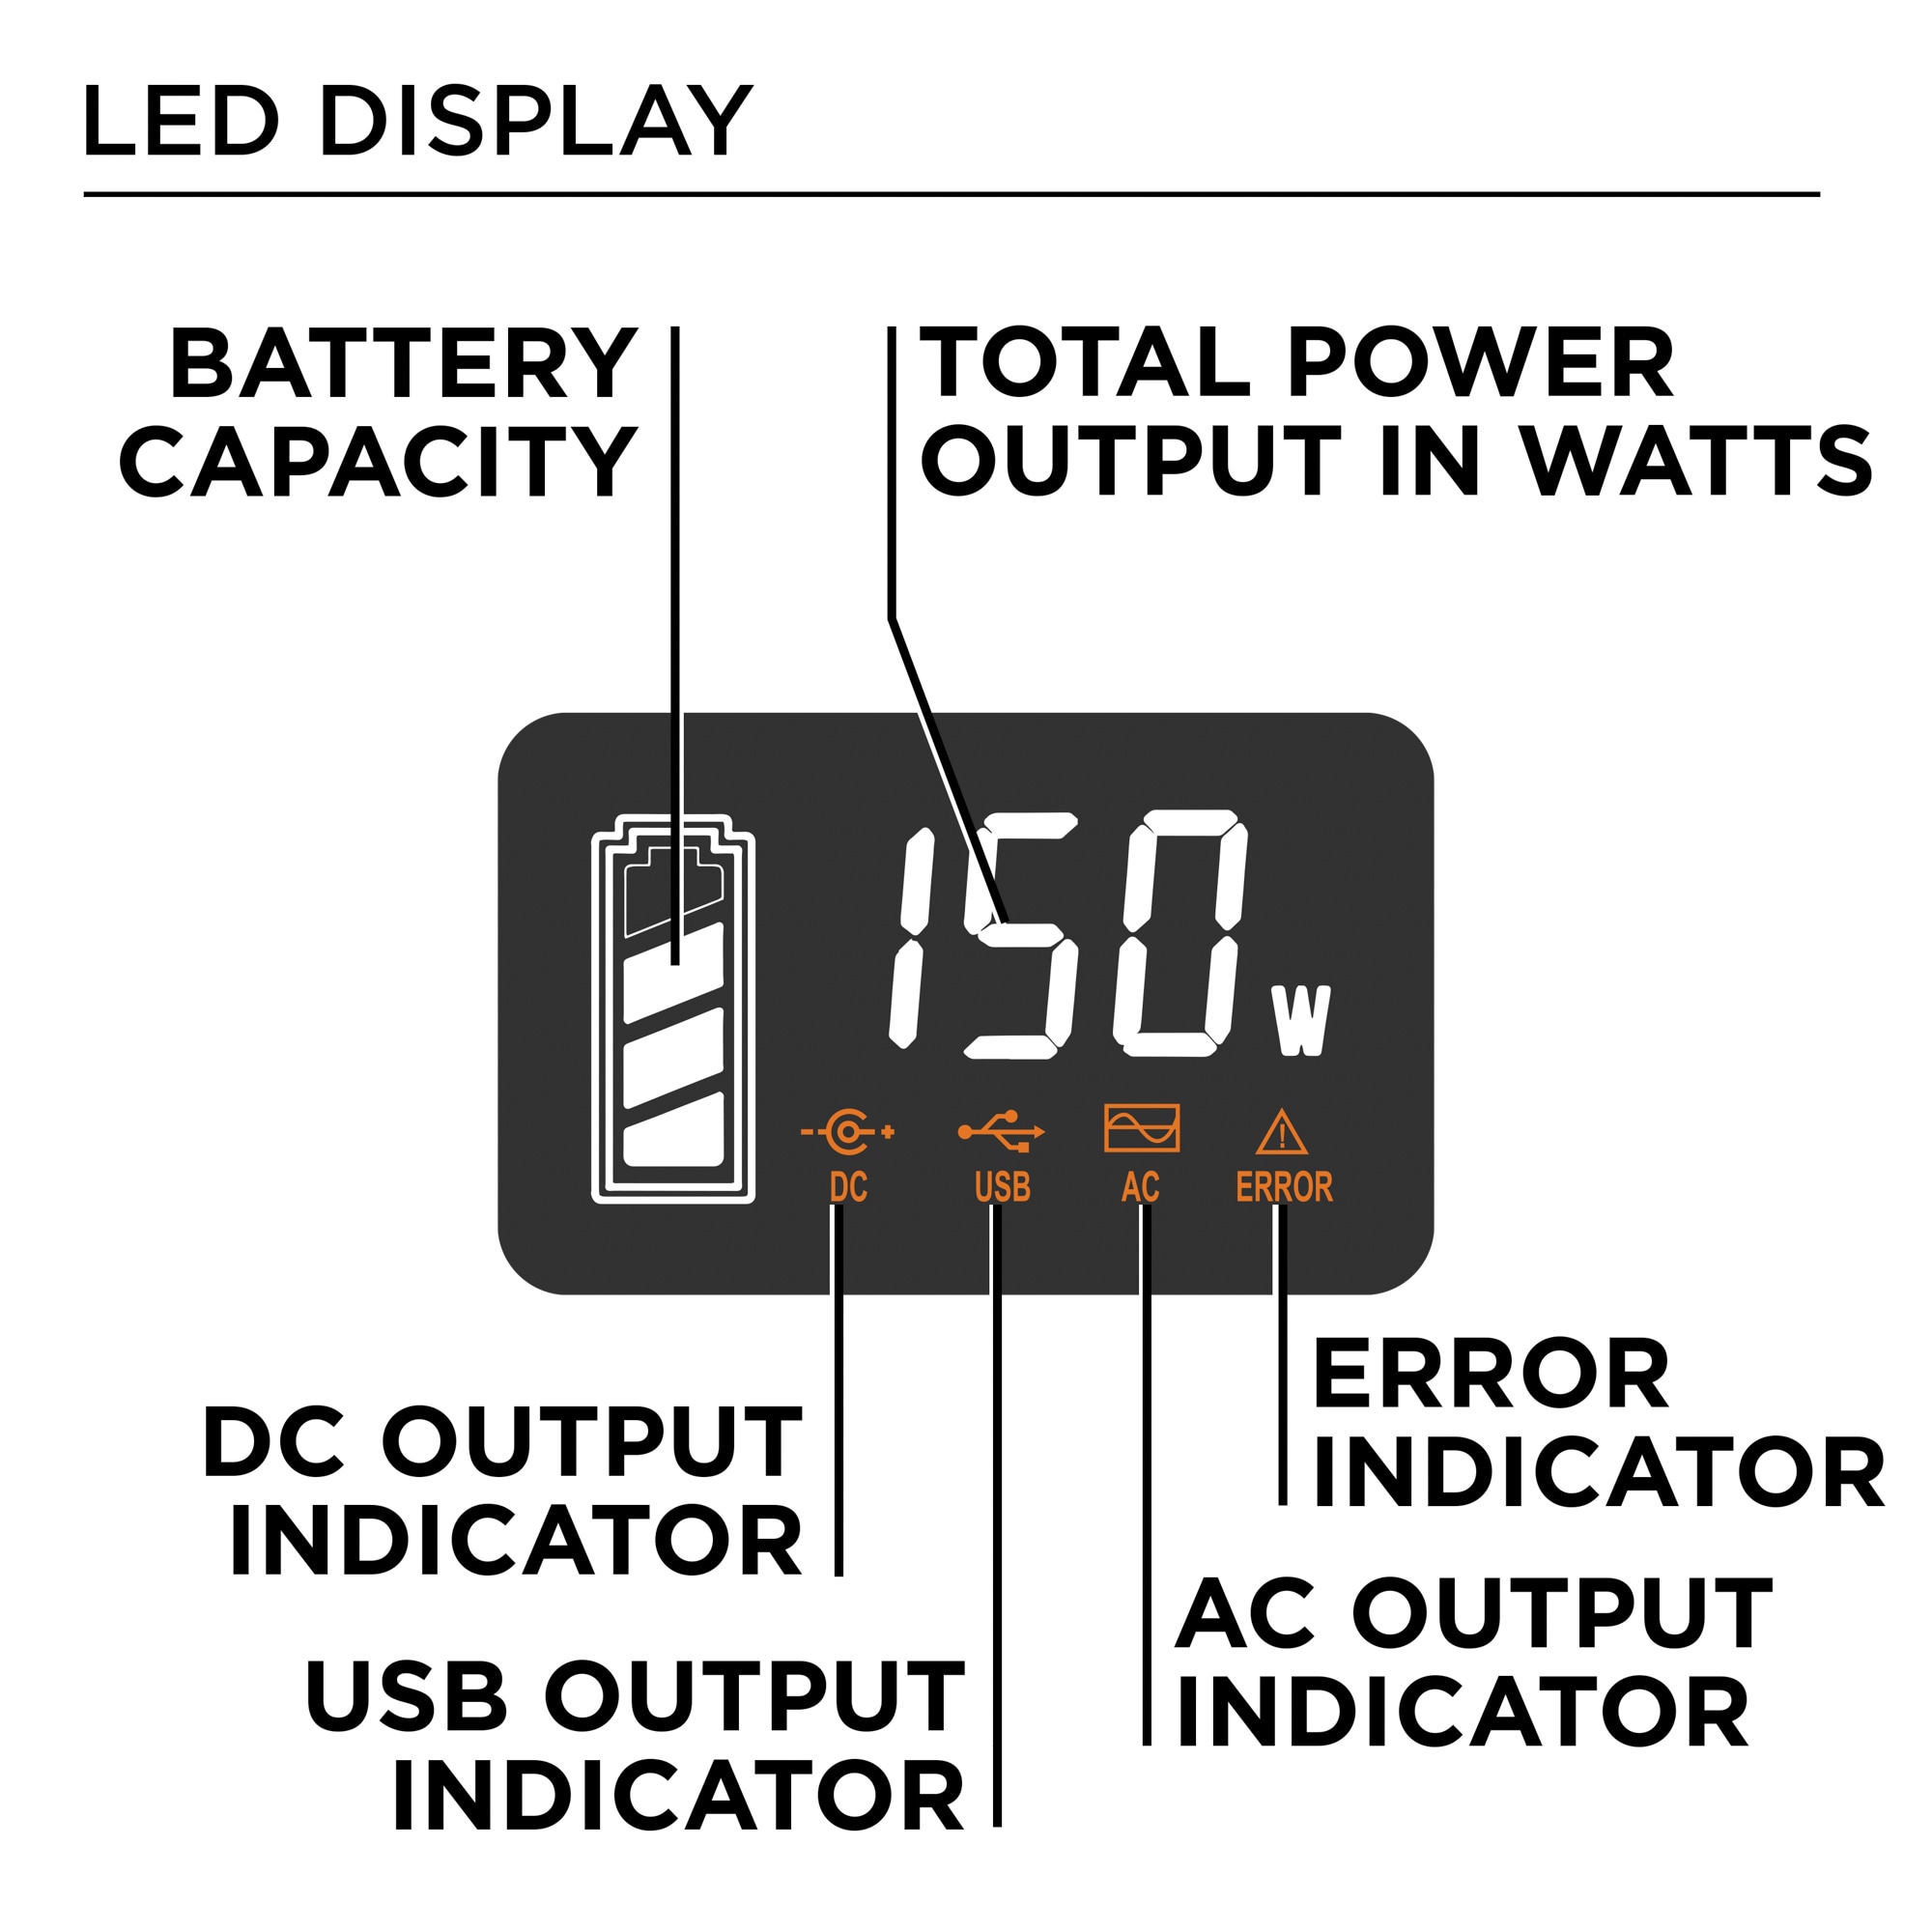 Can I change the unit of watt-hours (k, l) on the PR300 display?